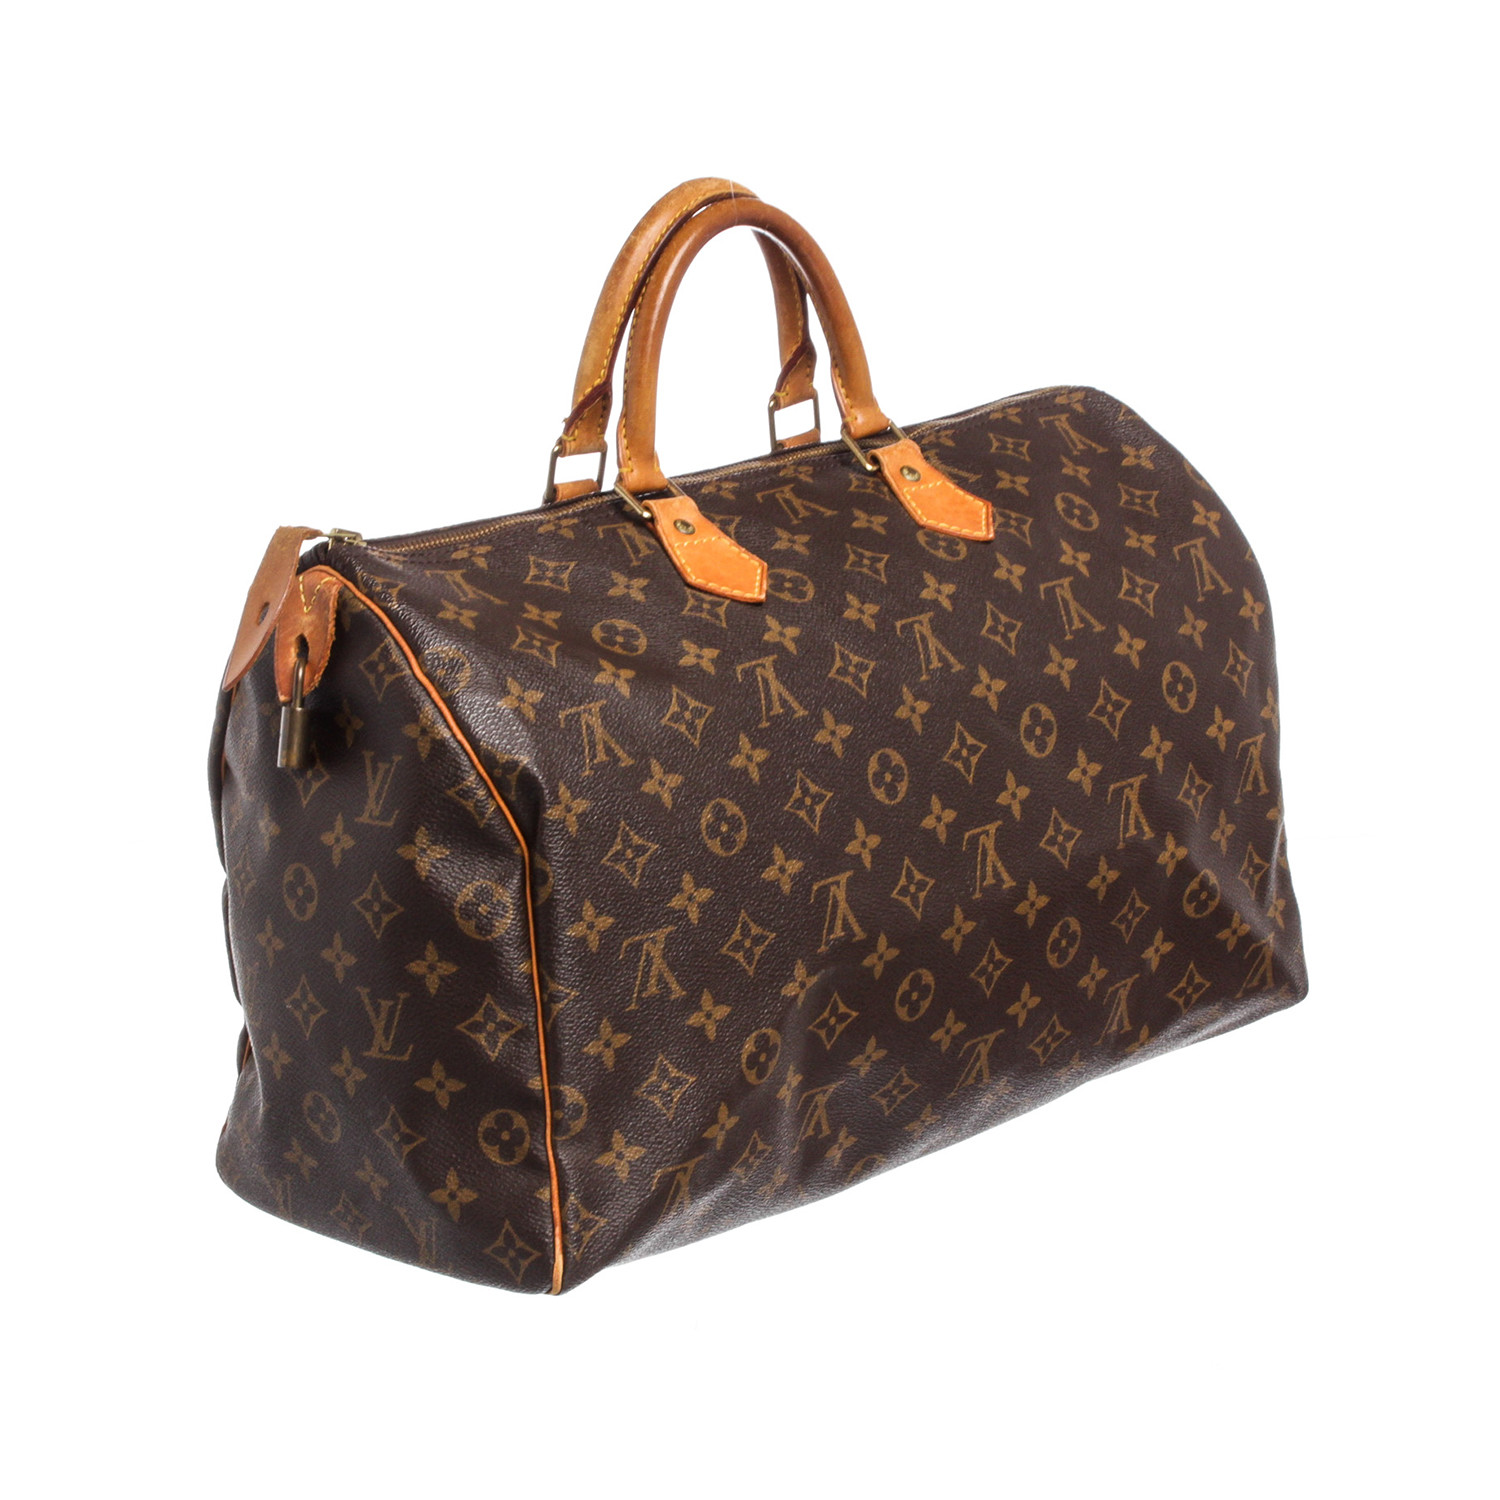 Louis Vuitton // Monogram Canvas Leather Speedy 40 cm Bag // SP0925 // Pre-Owned - Pre-Owned ...